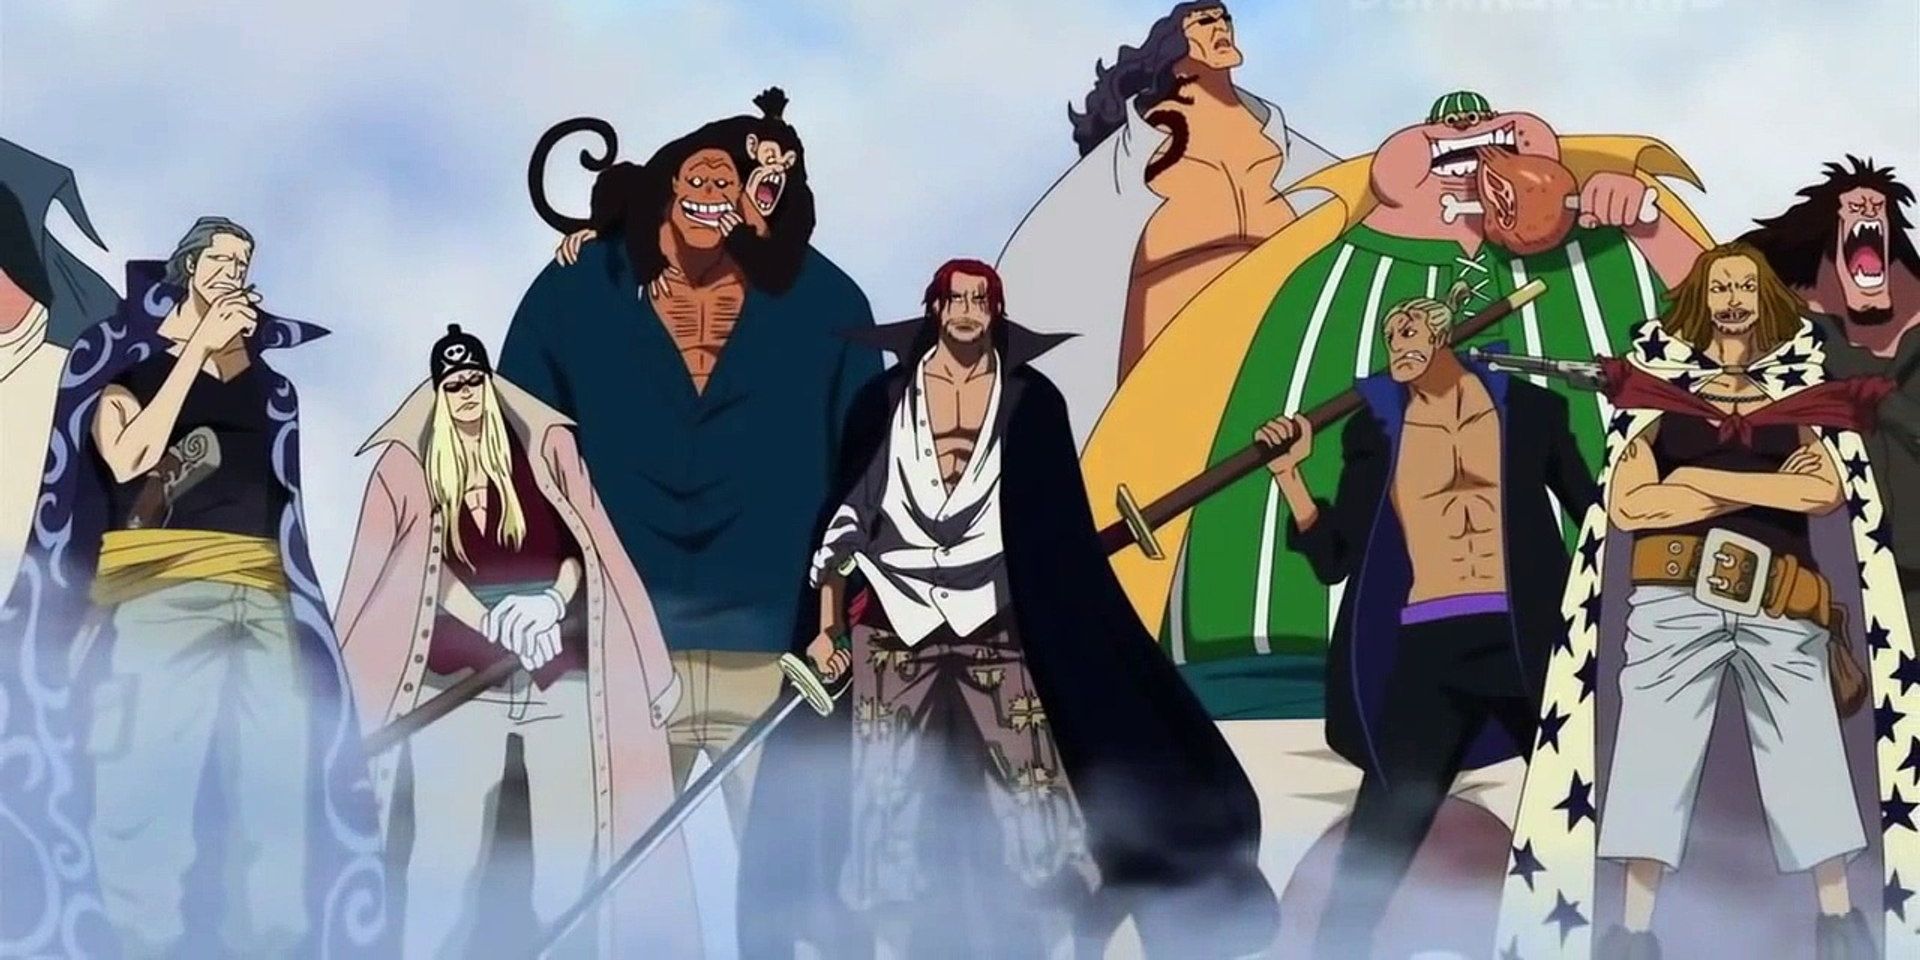 Shanks with the entire Red Hair Pirates crew during One Piece's Marineford arc.